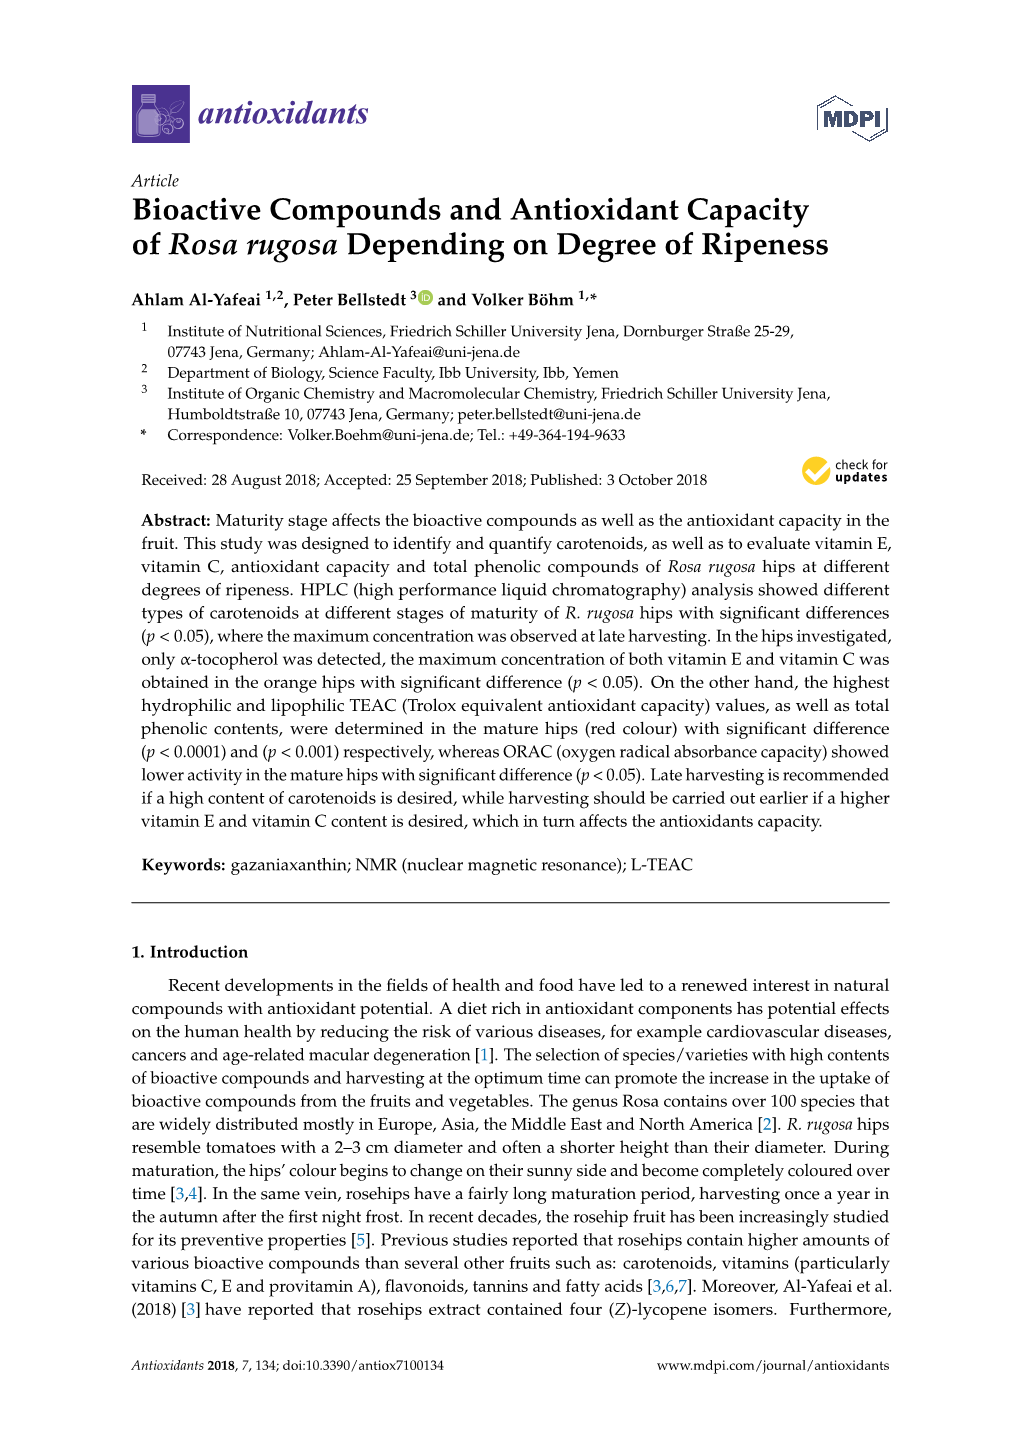 Bioactive Compounds and Antioxidant Capacity of Rosa Rugosa Depending on Degree of Ripeness